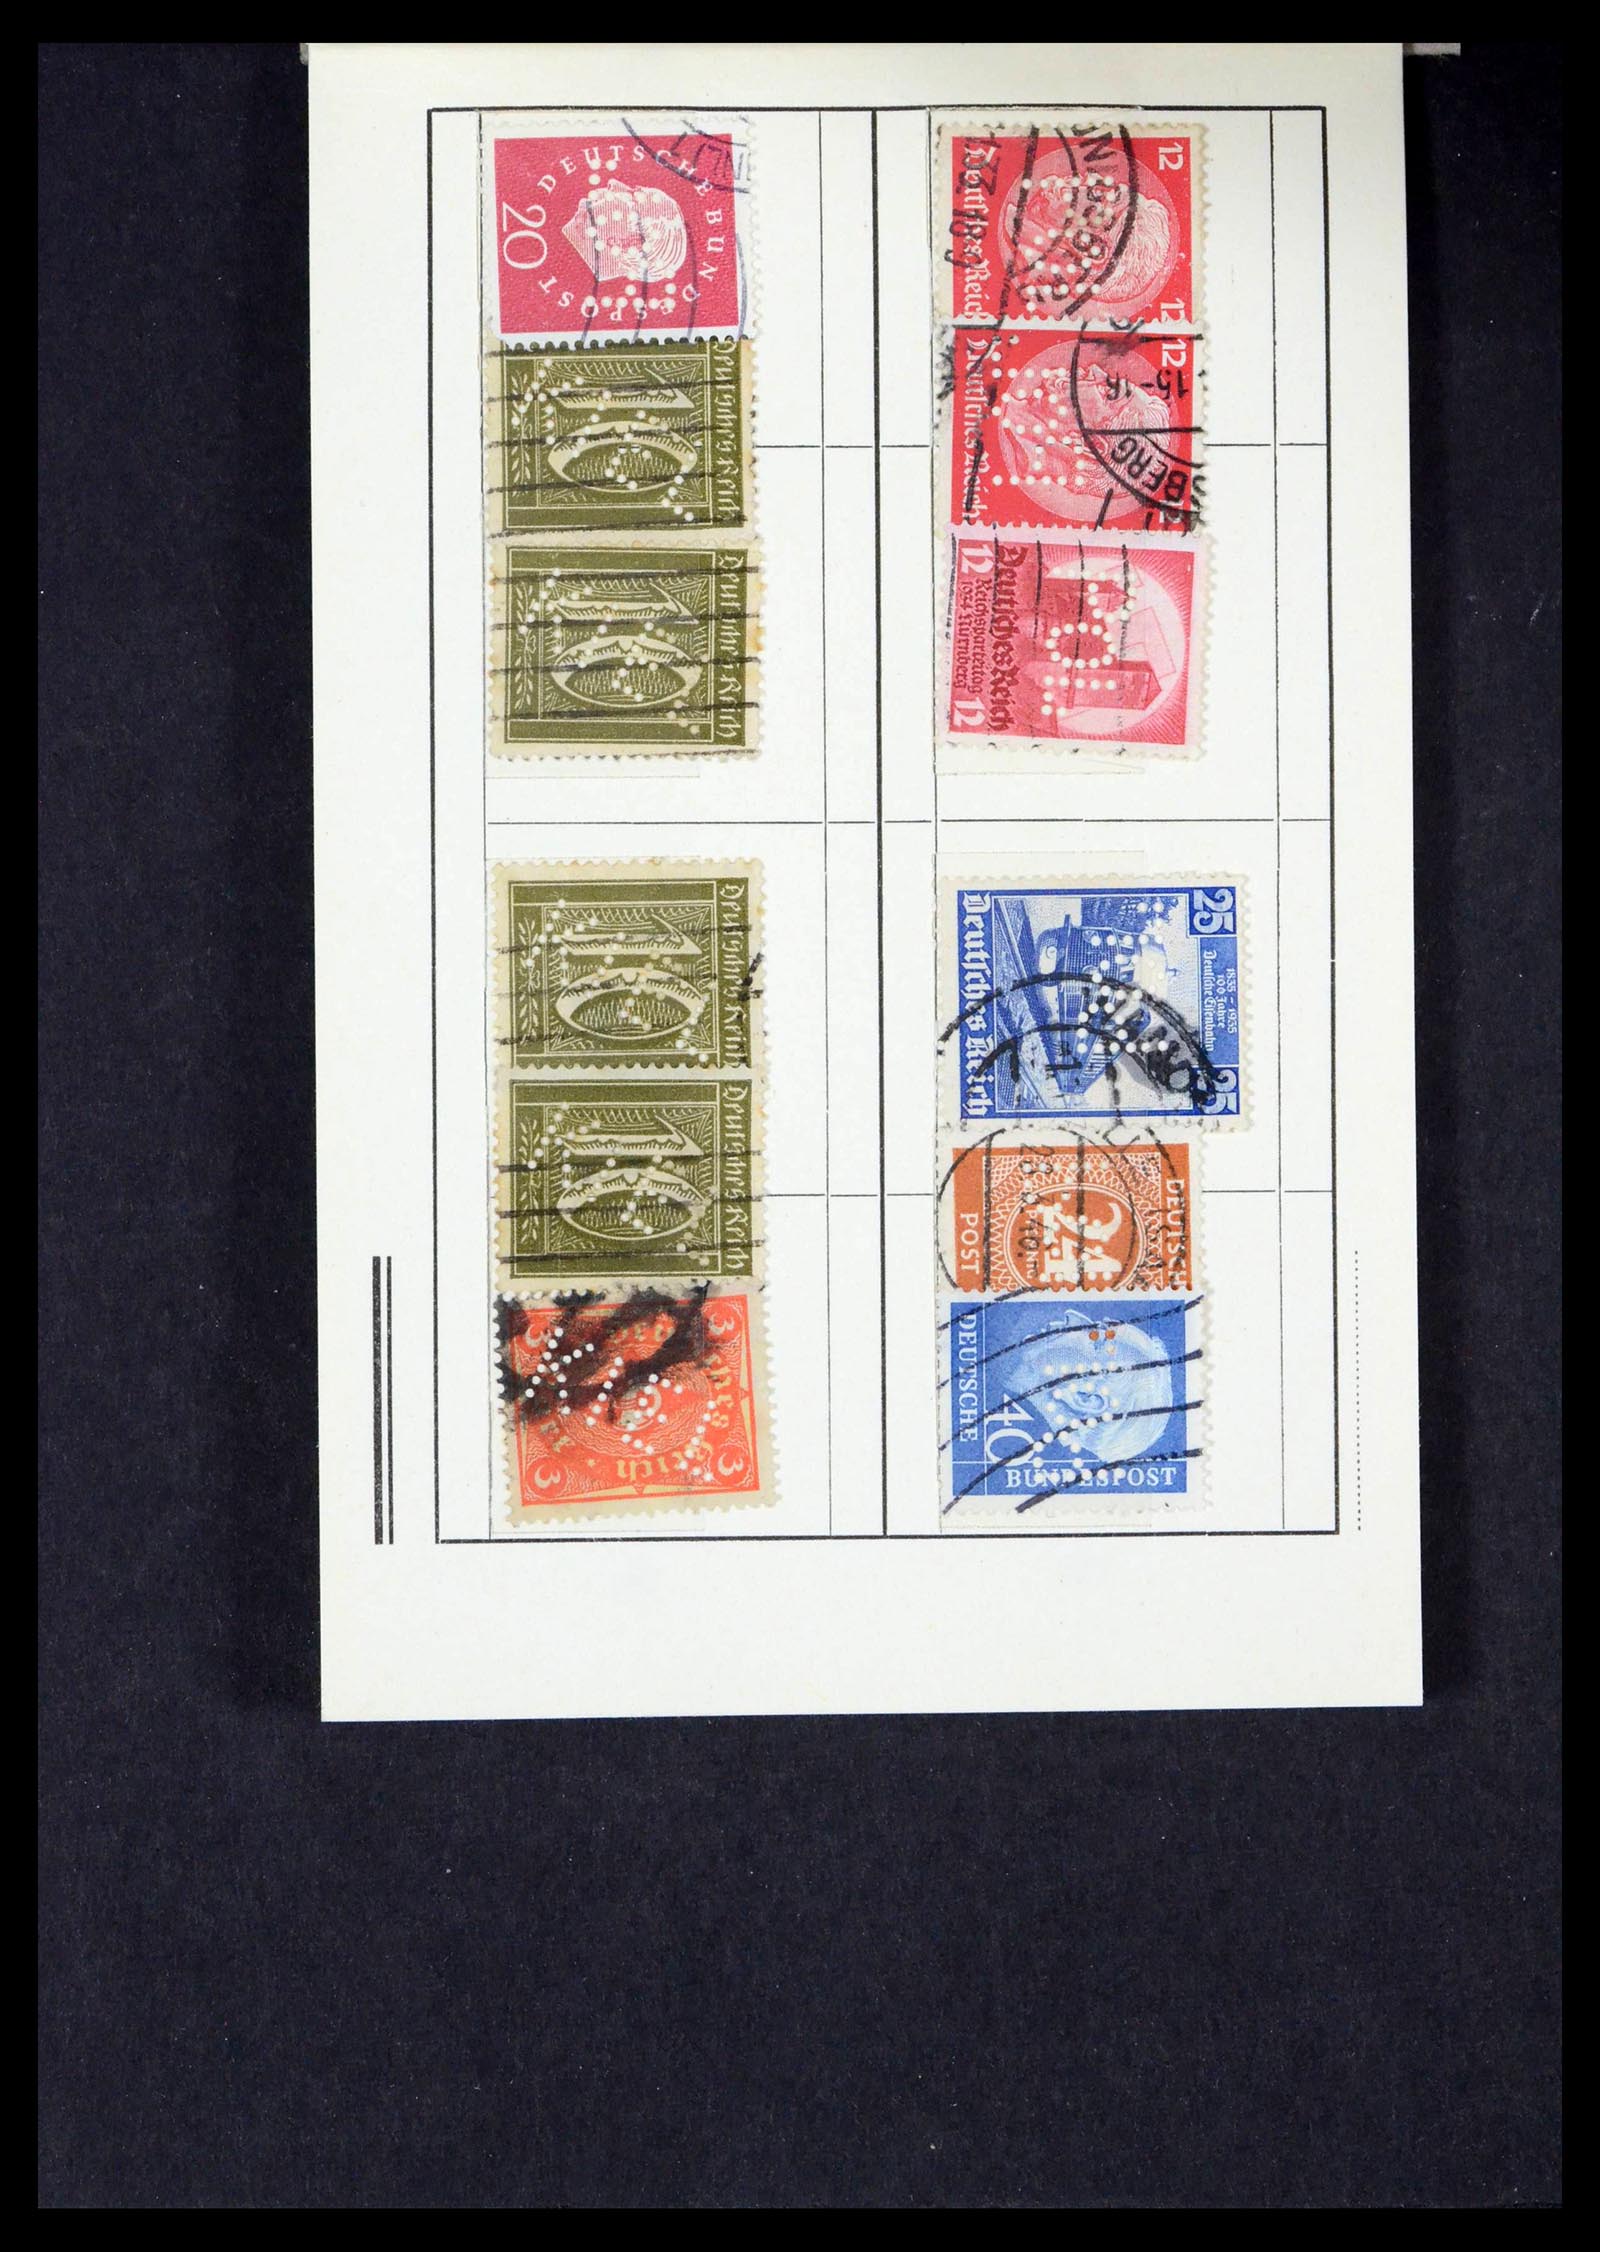 39458 0020 - Stamp collection 39458 Germany POL lochungen 1926-1955.